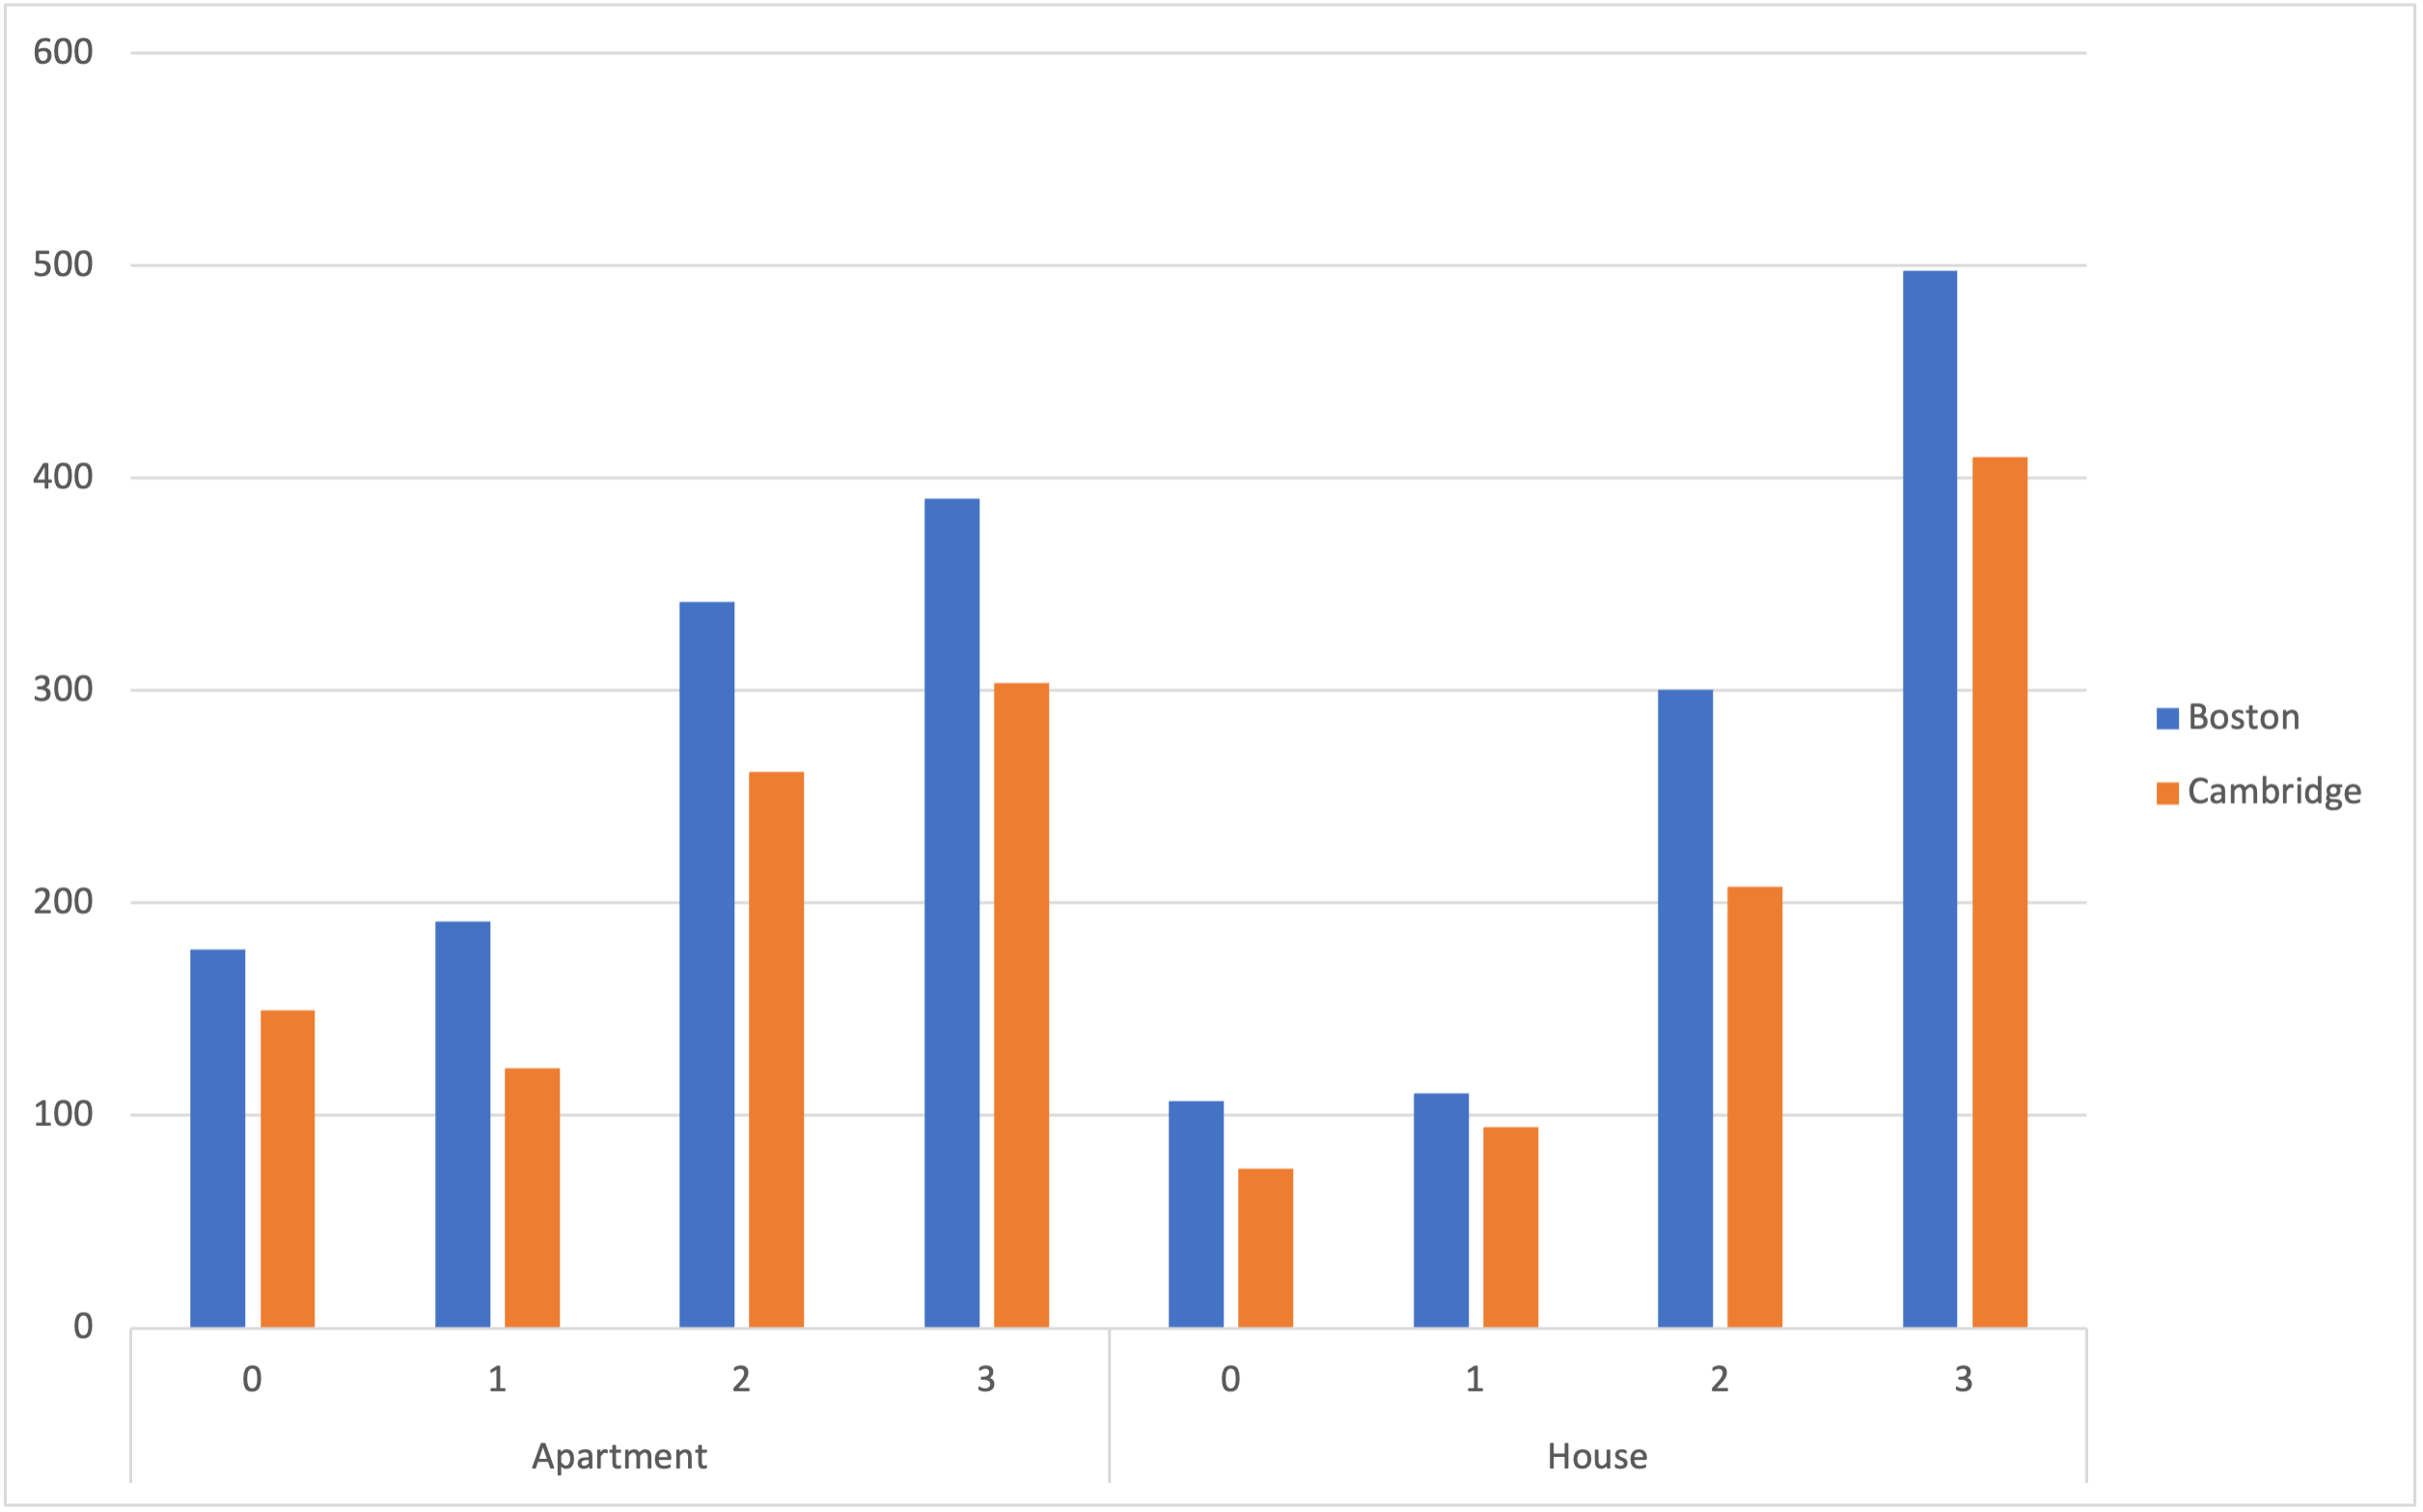 Pivot chart with rates grouped by city, bedroom count, and property type.